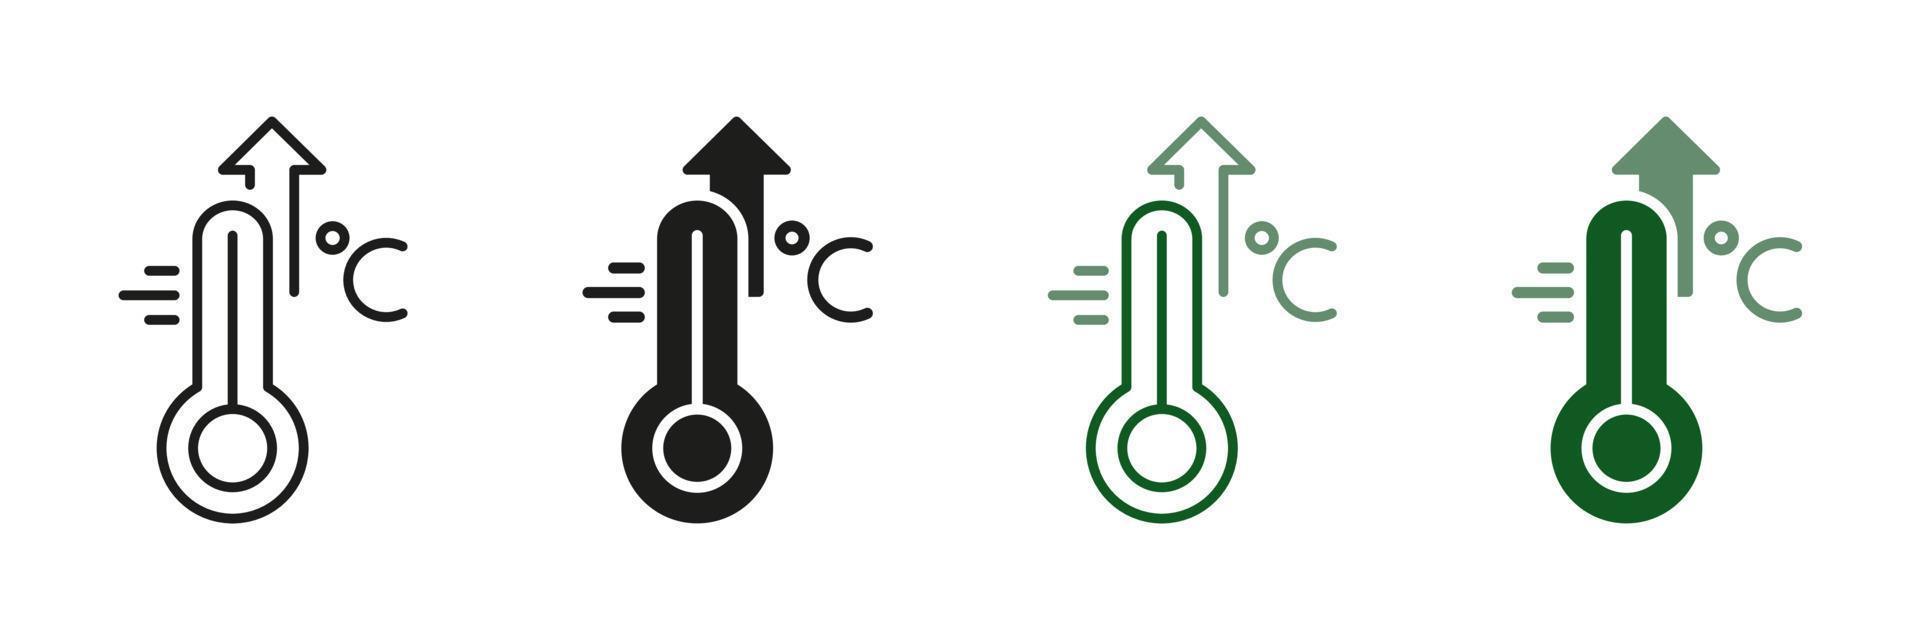 Increased Temperature of Human Body. High Temperature Scale Line and Silhouette Icon Set. Flu, Cold, Virus, Fever Symptoms Symbol Collection. Thermometer with Arrow Up Pictogram. Vector illustration.